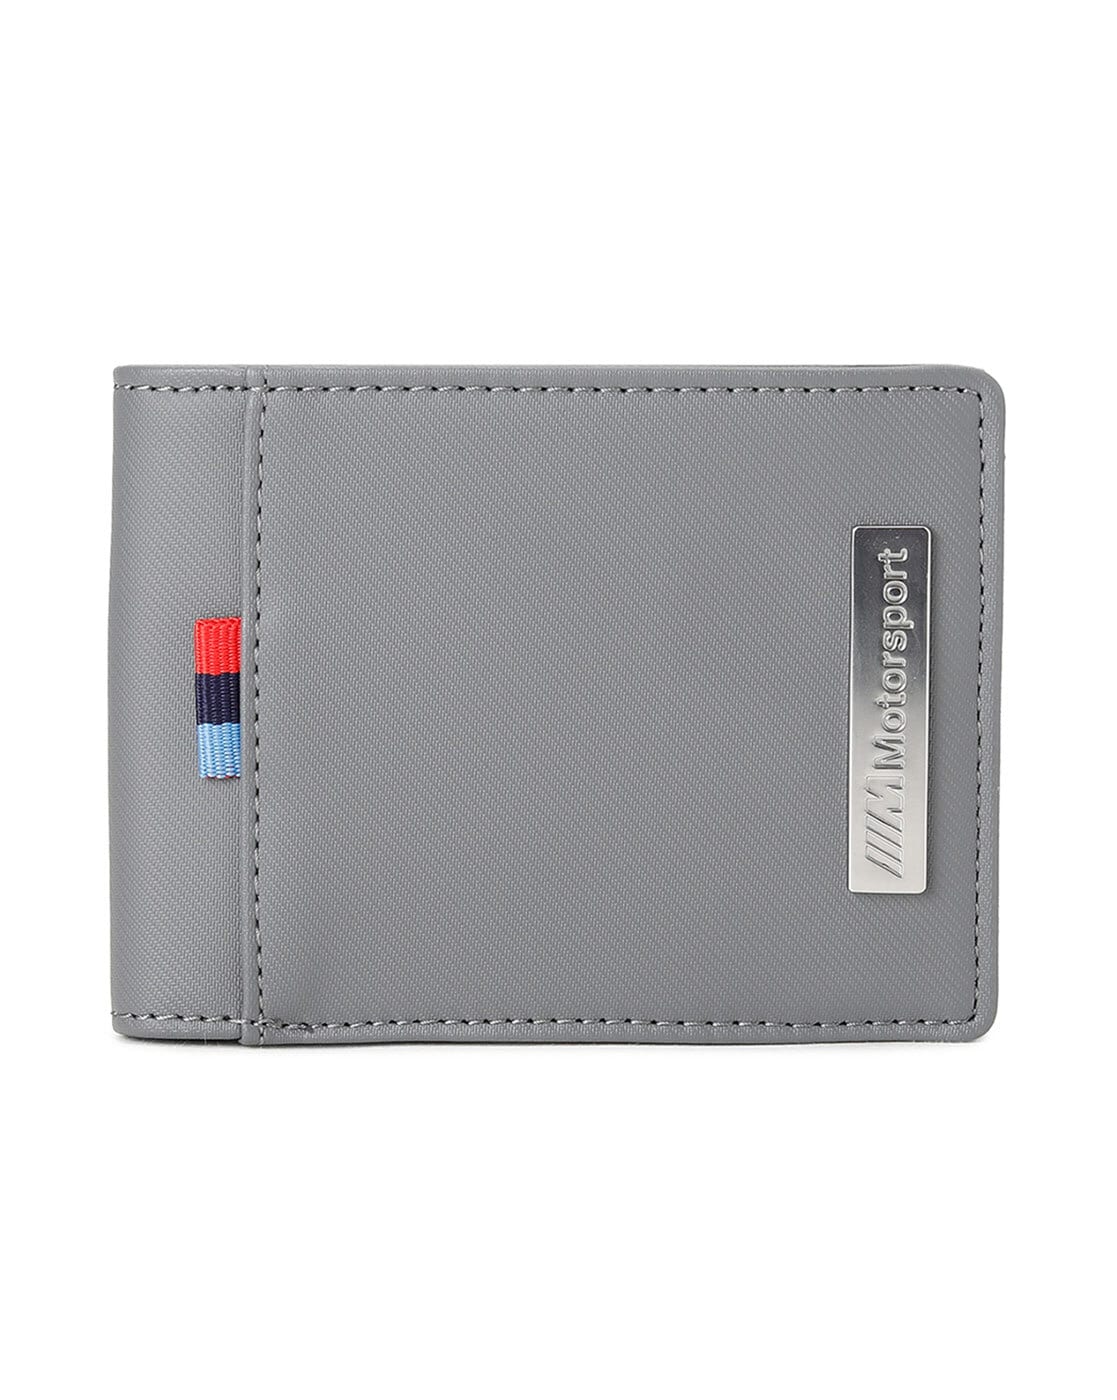 PUMA Unisex BMW M Motorsport Wallet Black : Amazon.in: Bags, Wallets and  Luggage